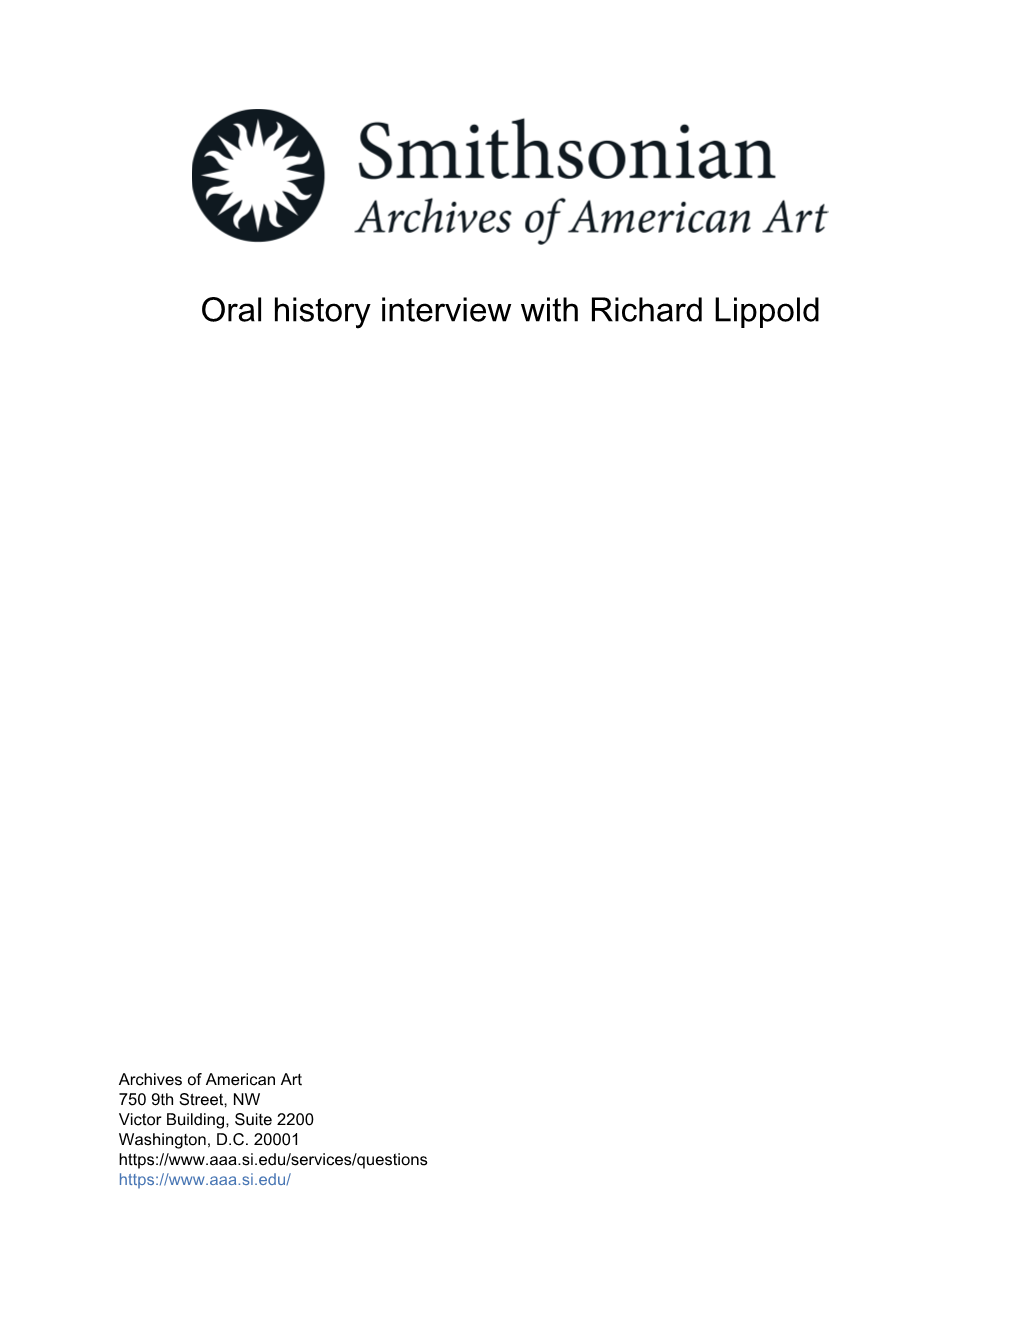 Oral History Interview with Richard Lippold